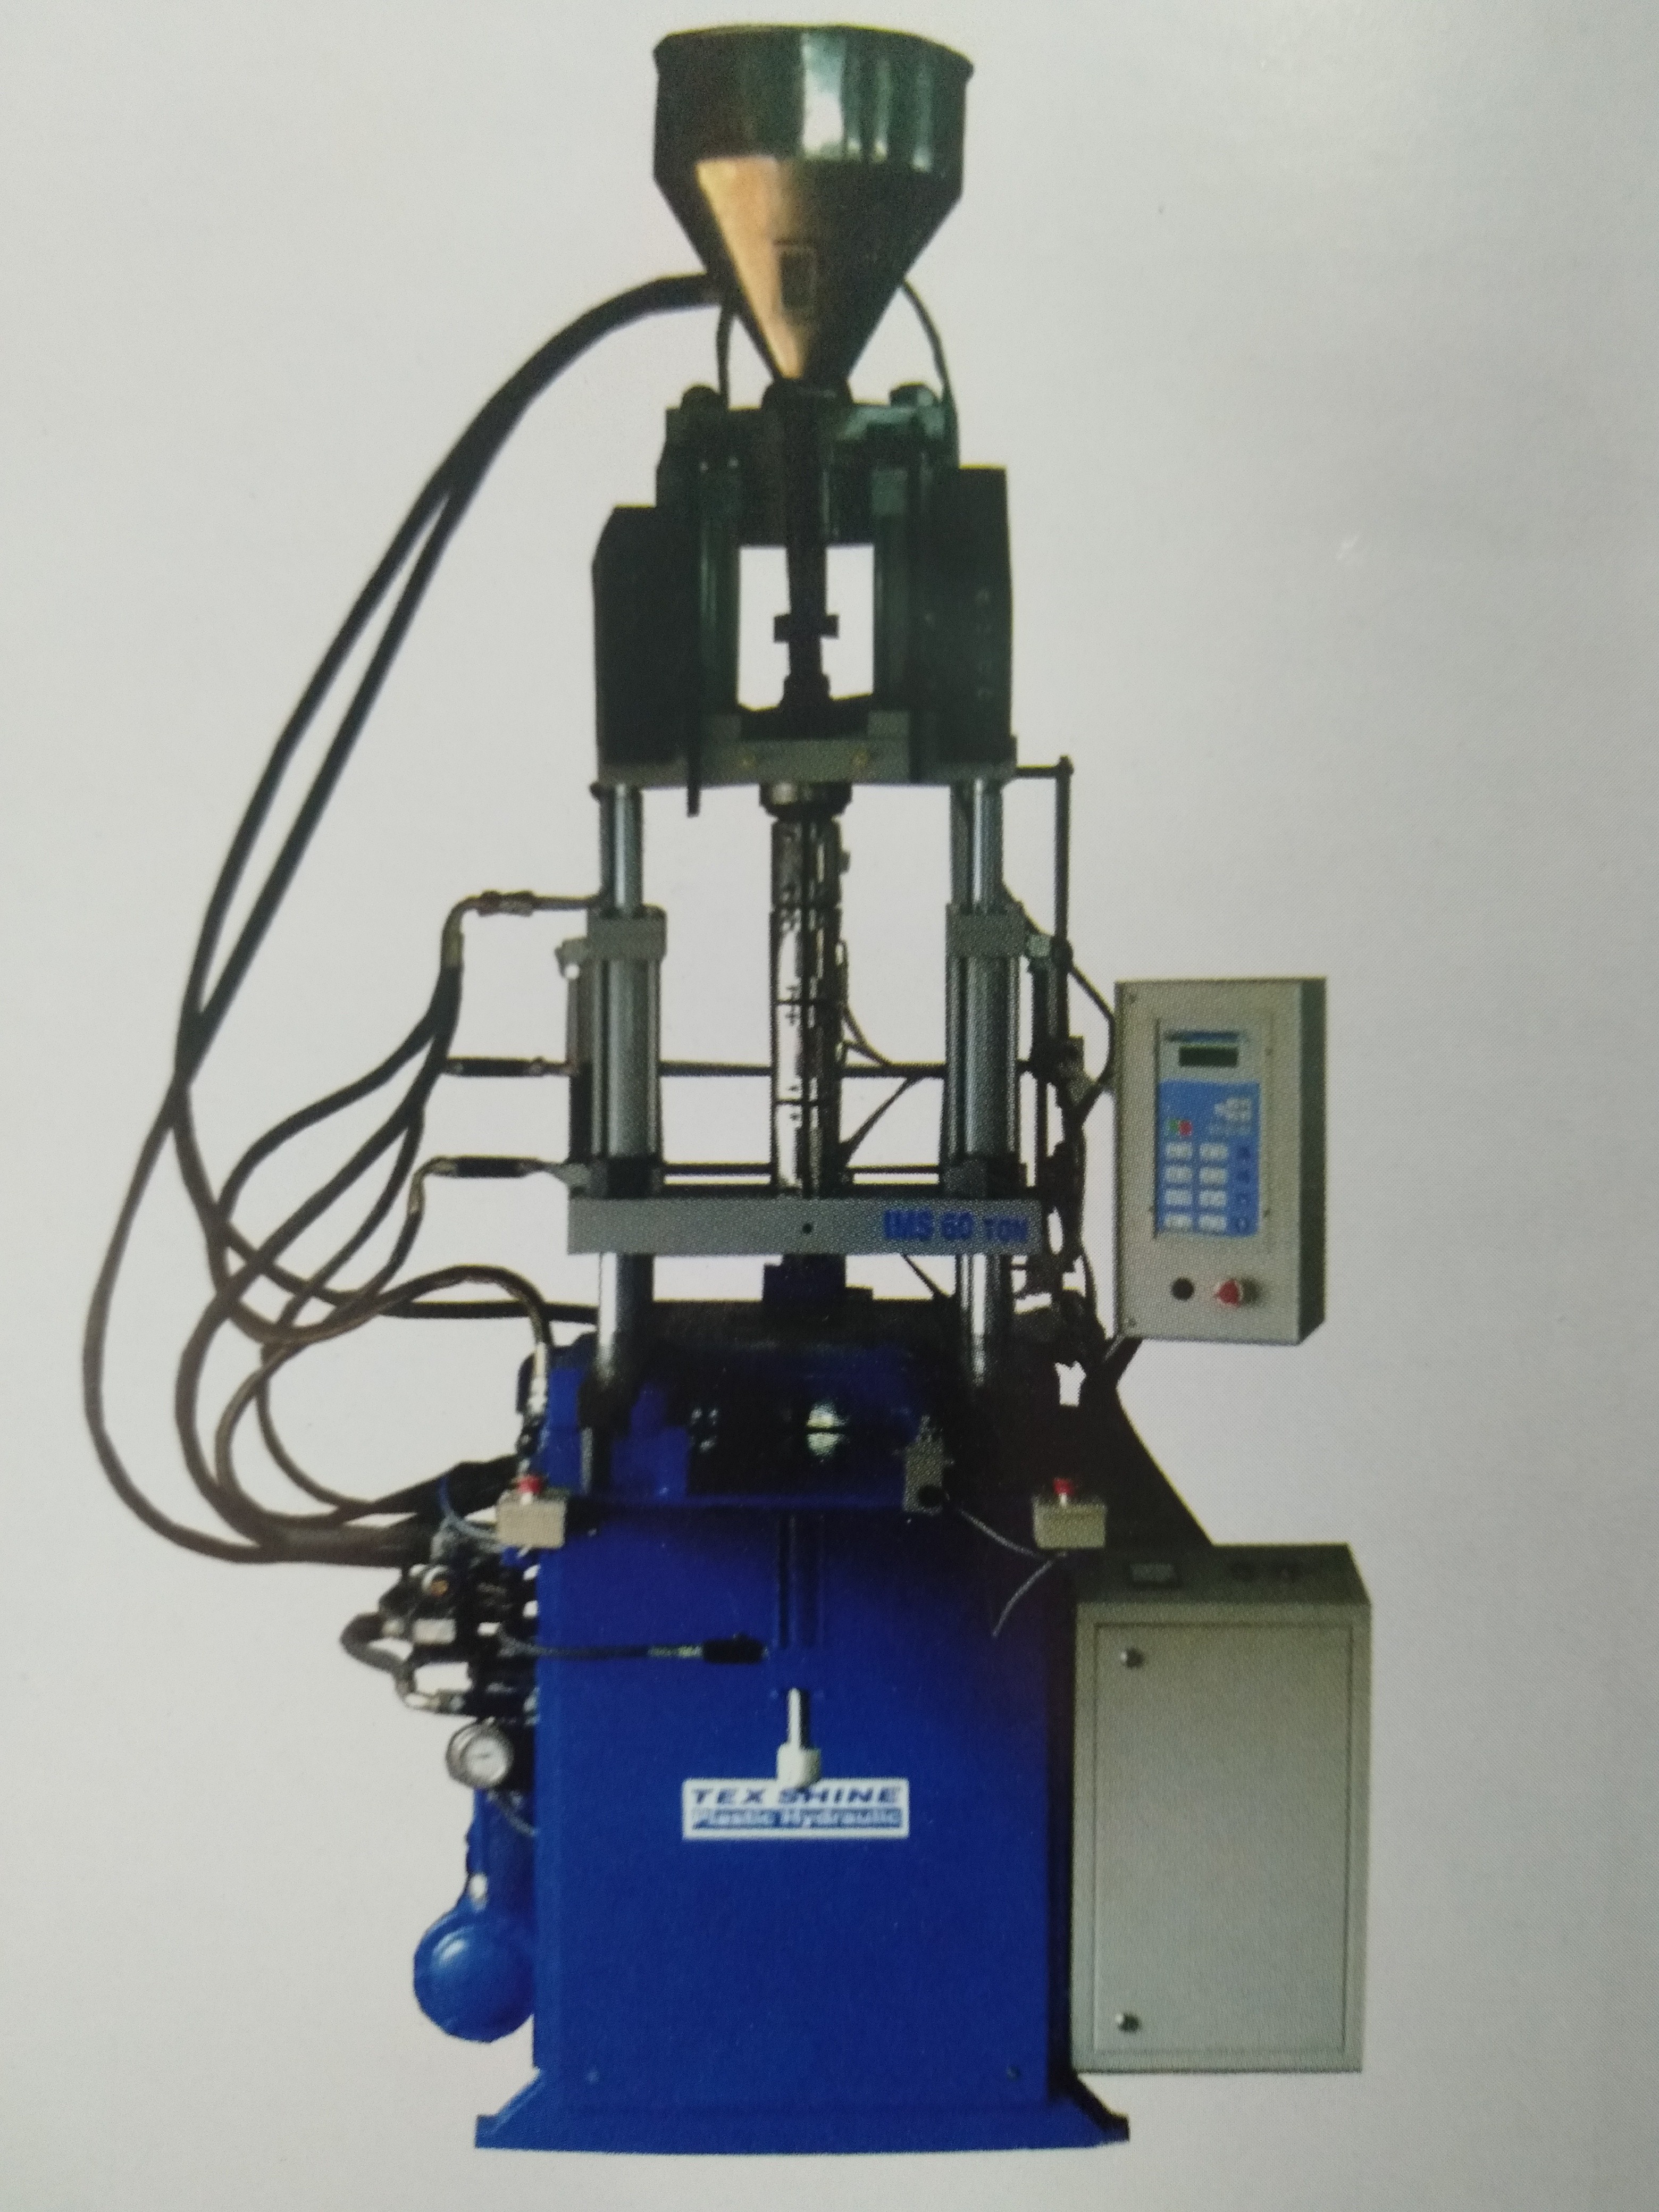 PLC Based Plastic injection moulding machine manufacturer in coimbatore